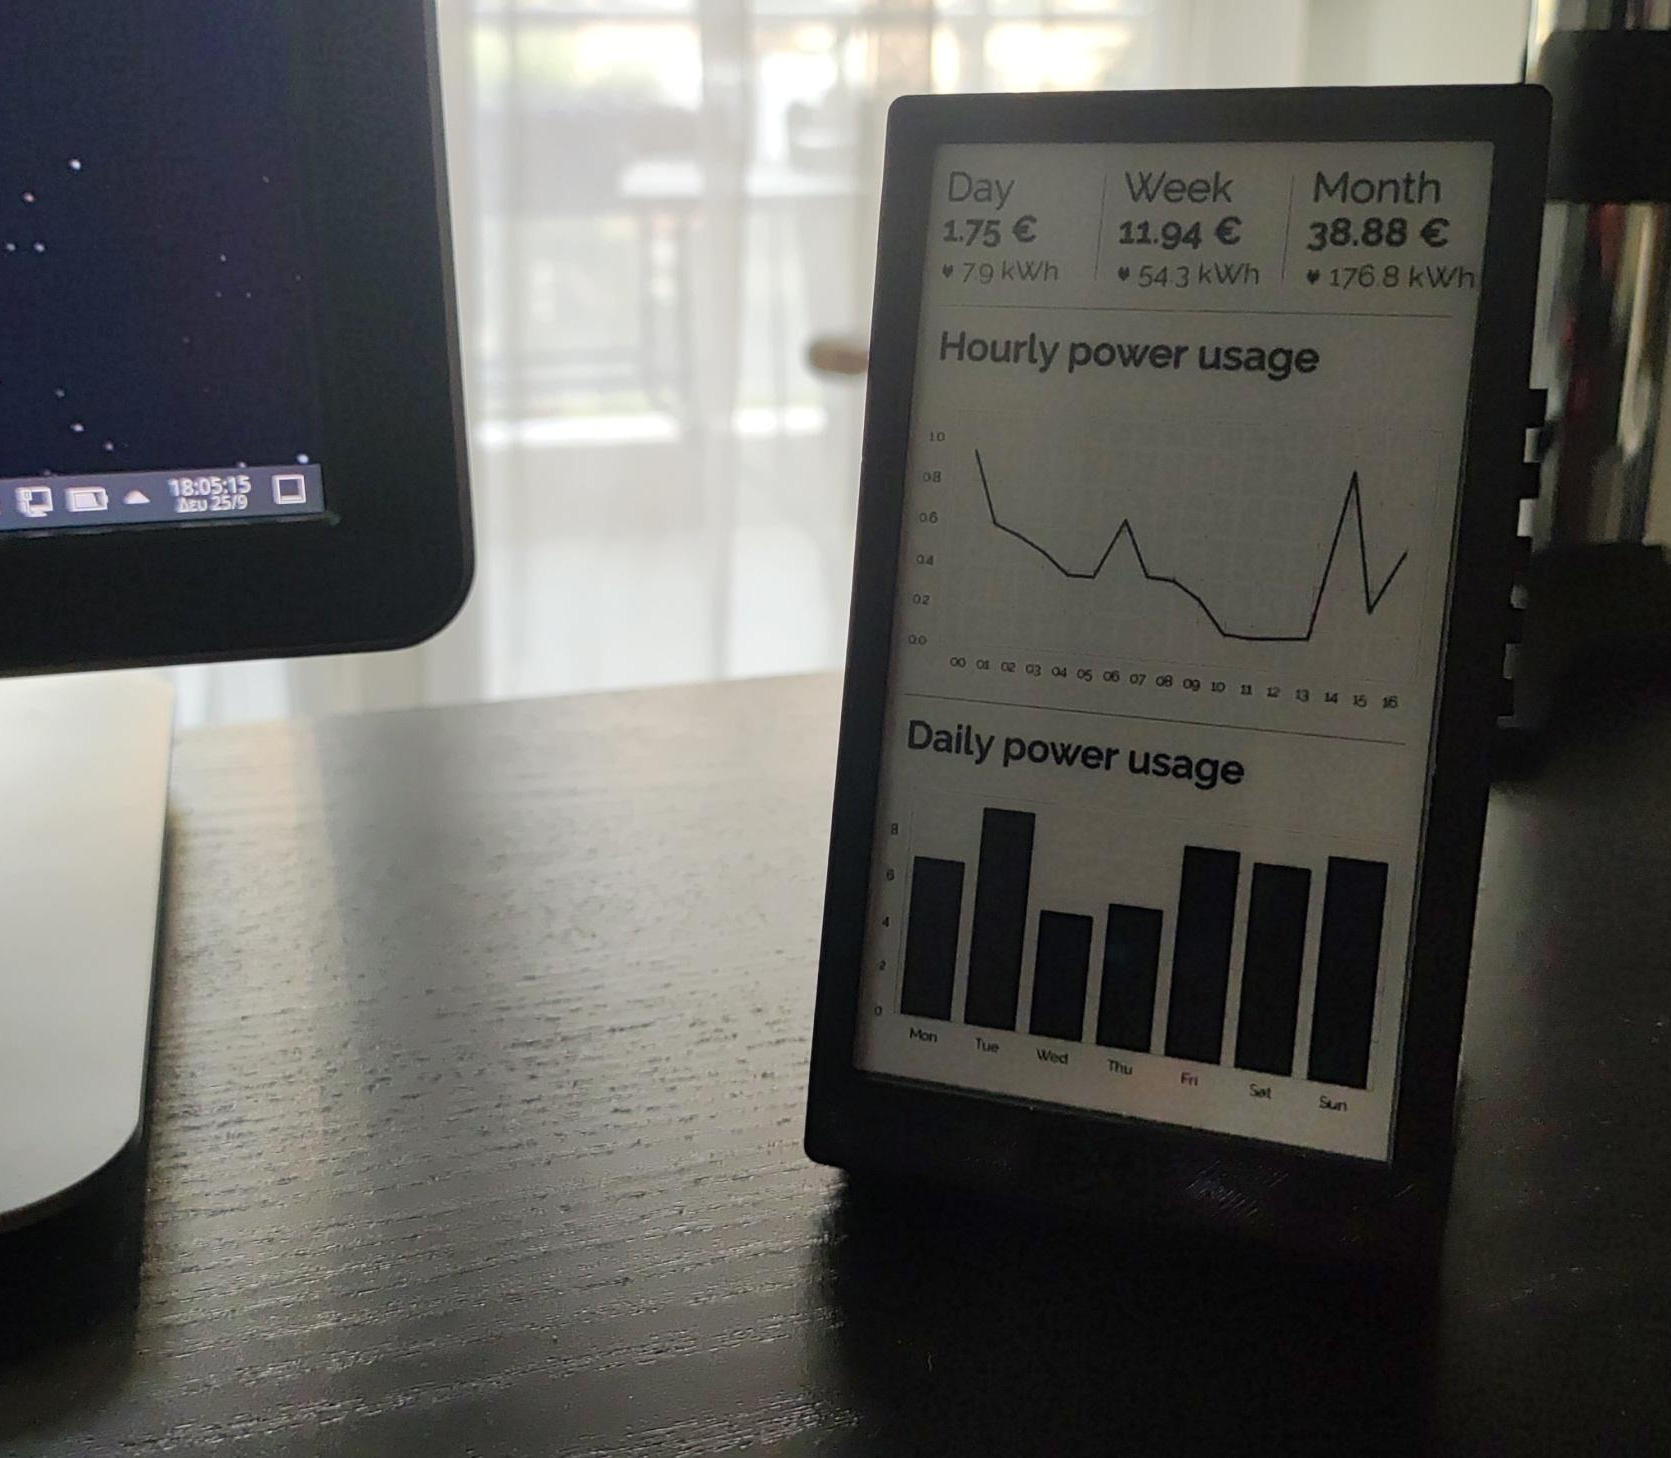 I made an e-ink display that shows my calendar - Stavros' Stuff